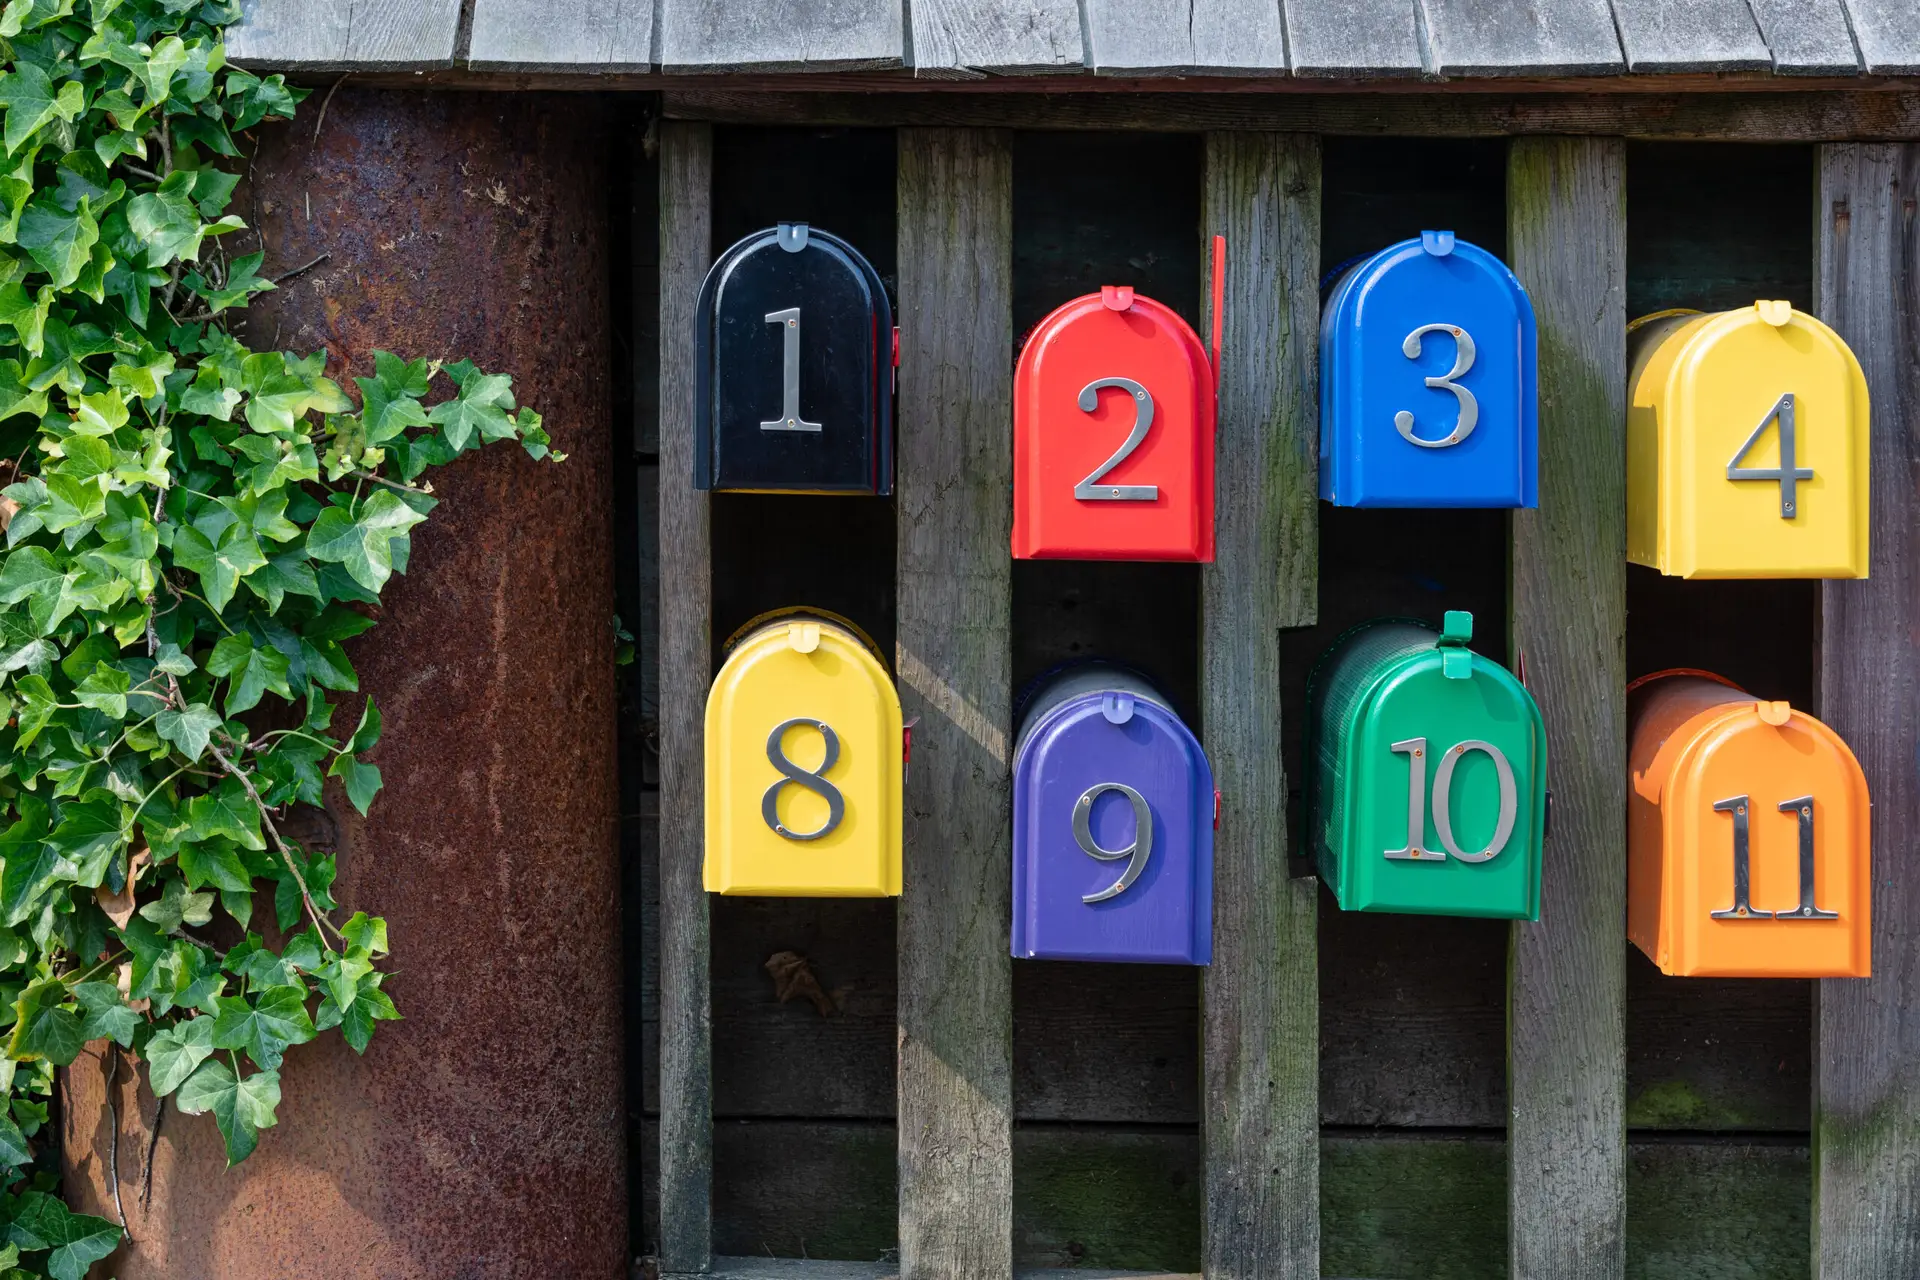 A row of colourful numbered postal boxes